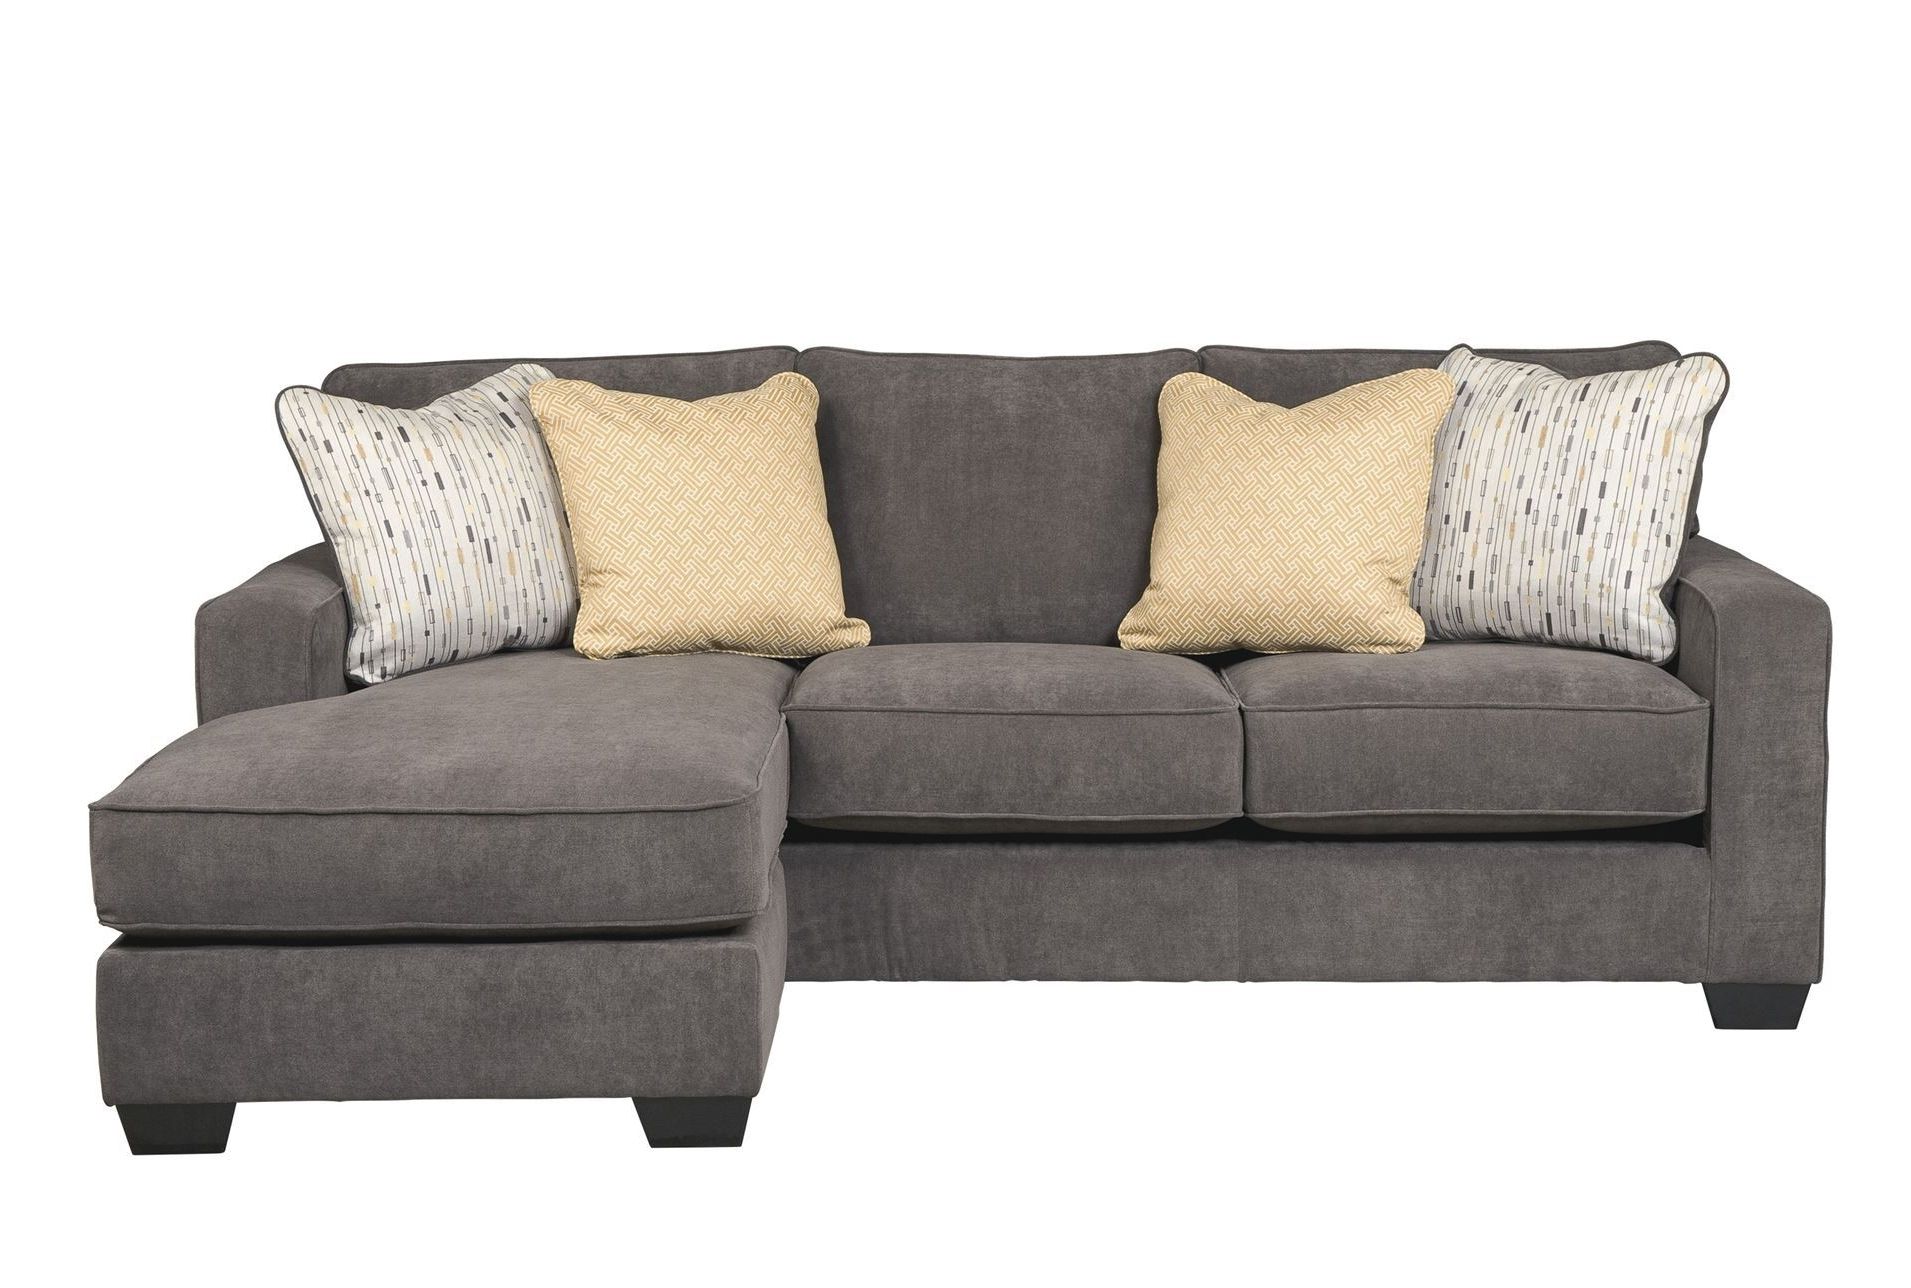 Living Spaces, Living Rooms And Apartments With Regard To Chaise Lounge Couches (View 12 of 15)